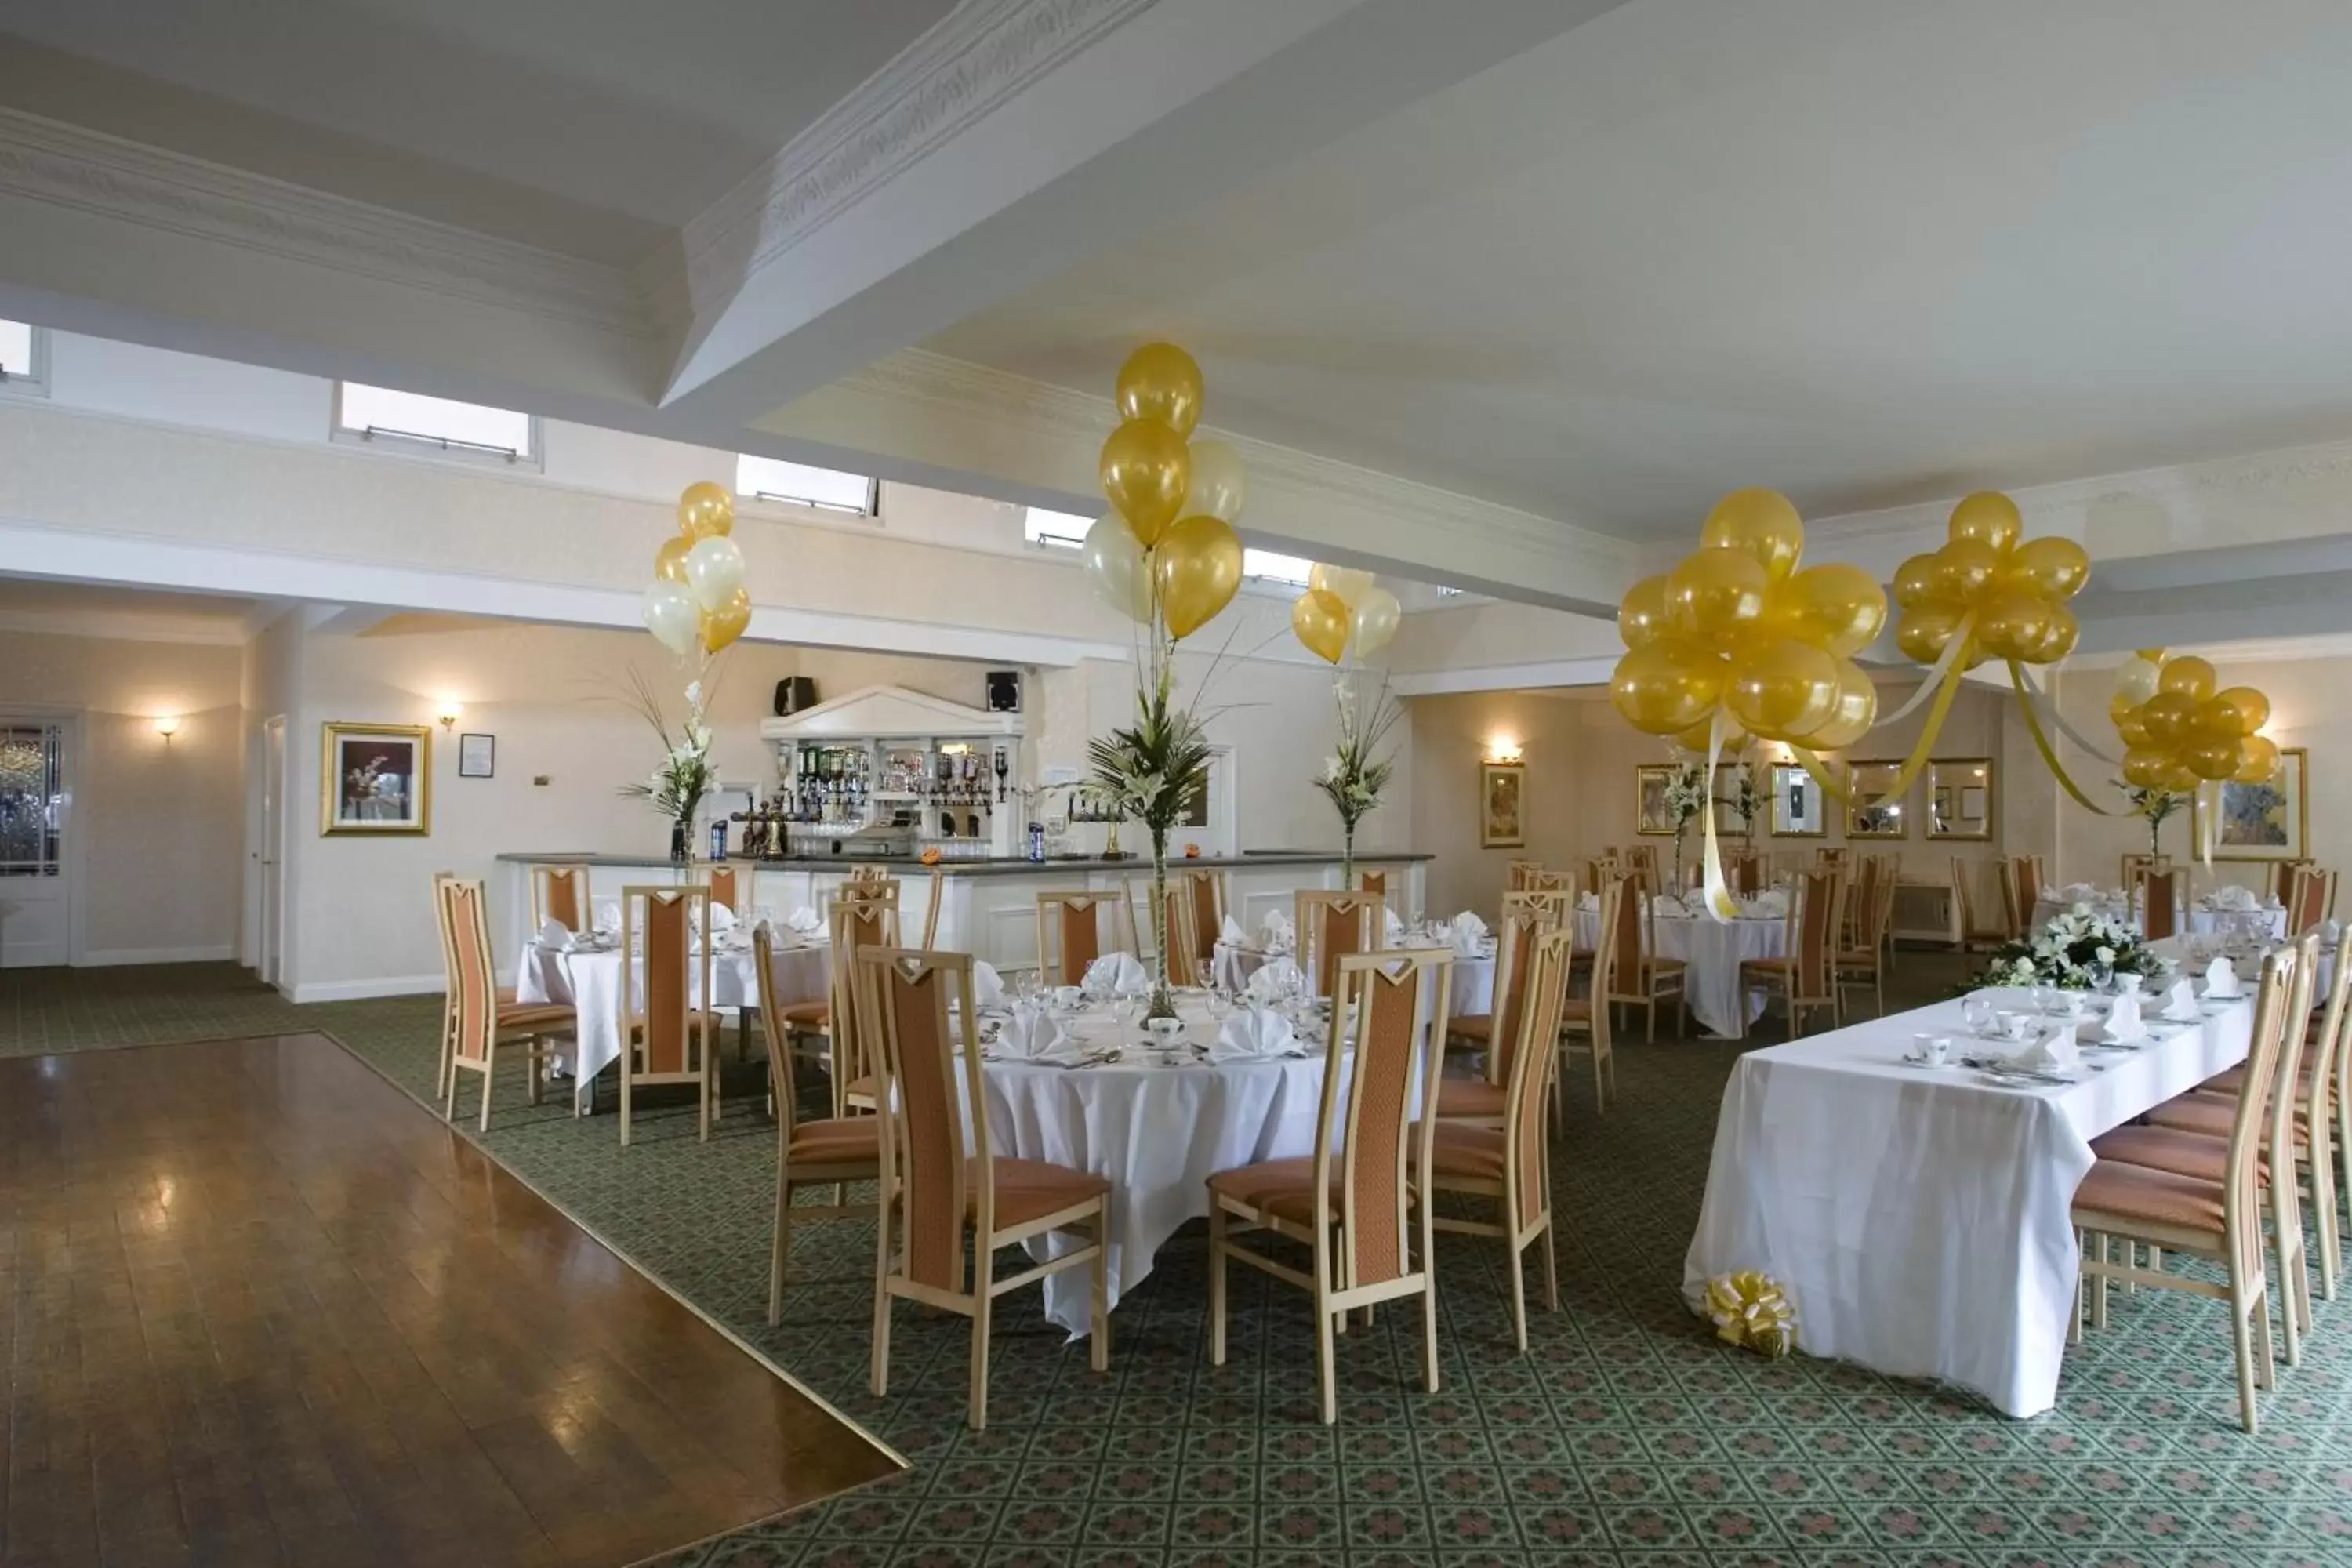 Banquet/Function facilities, Banquet Facilities in Best Western Thurrock Hotel